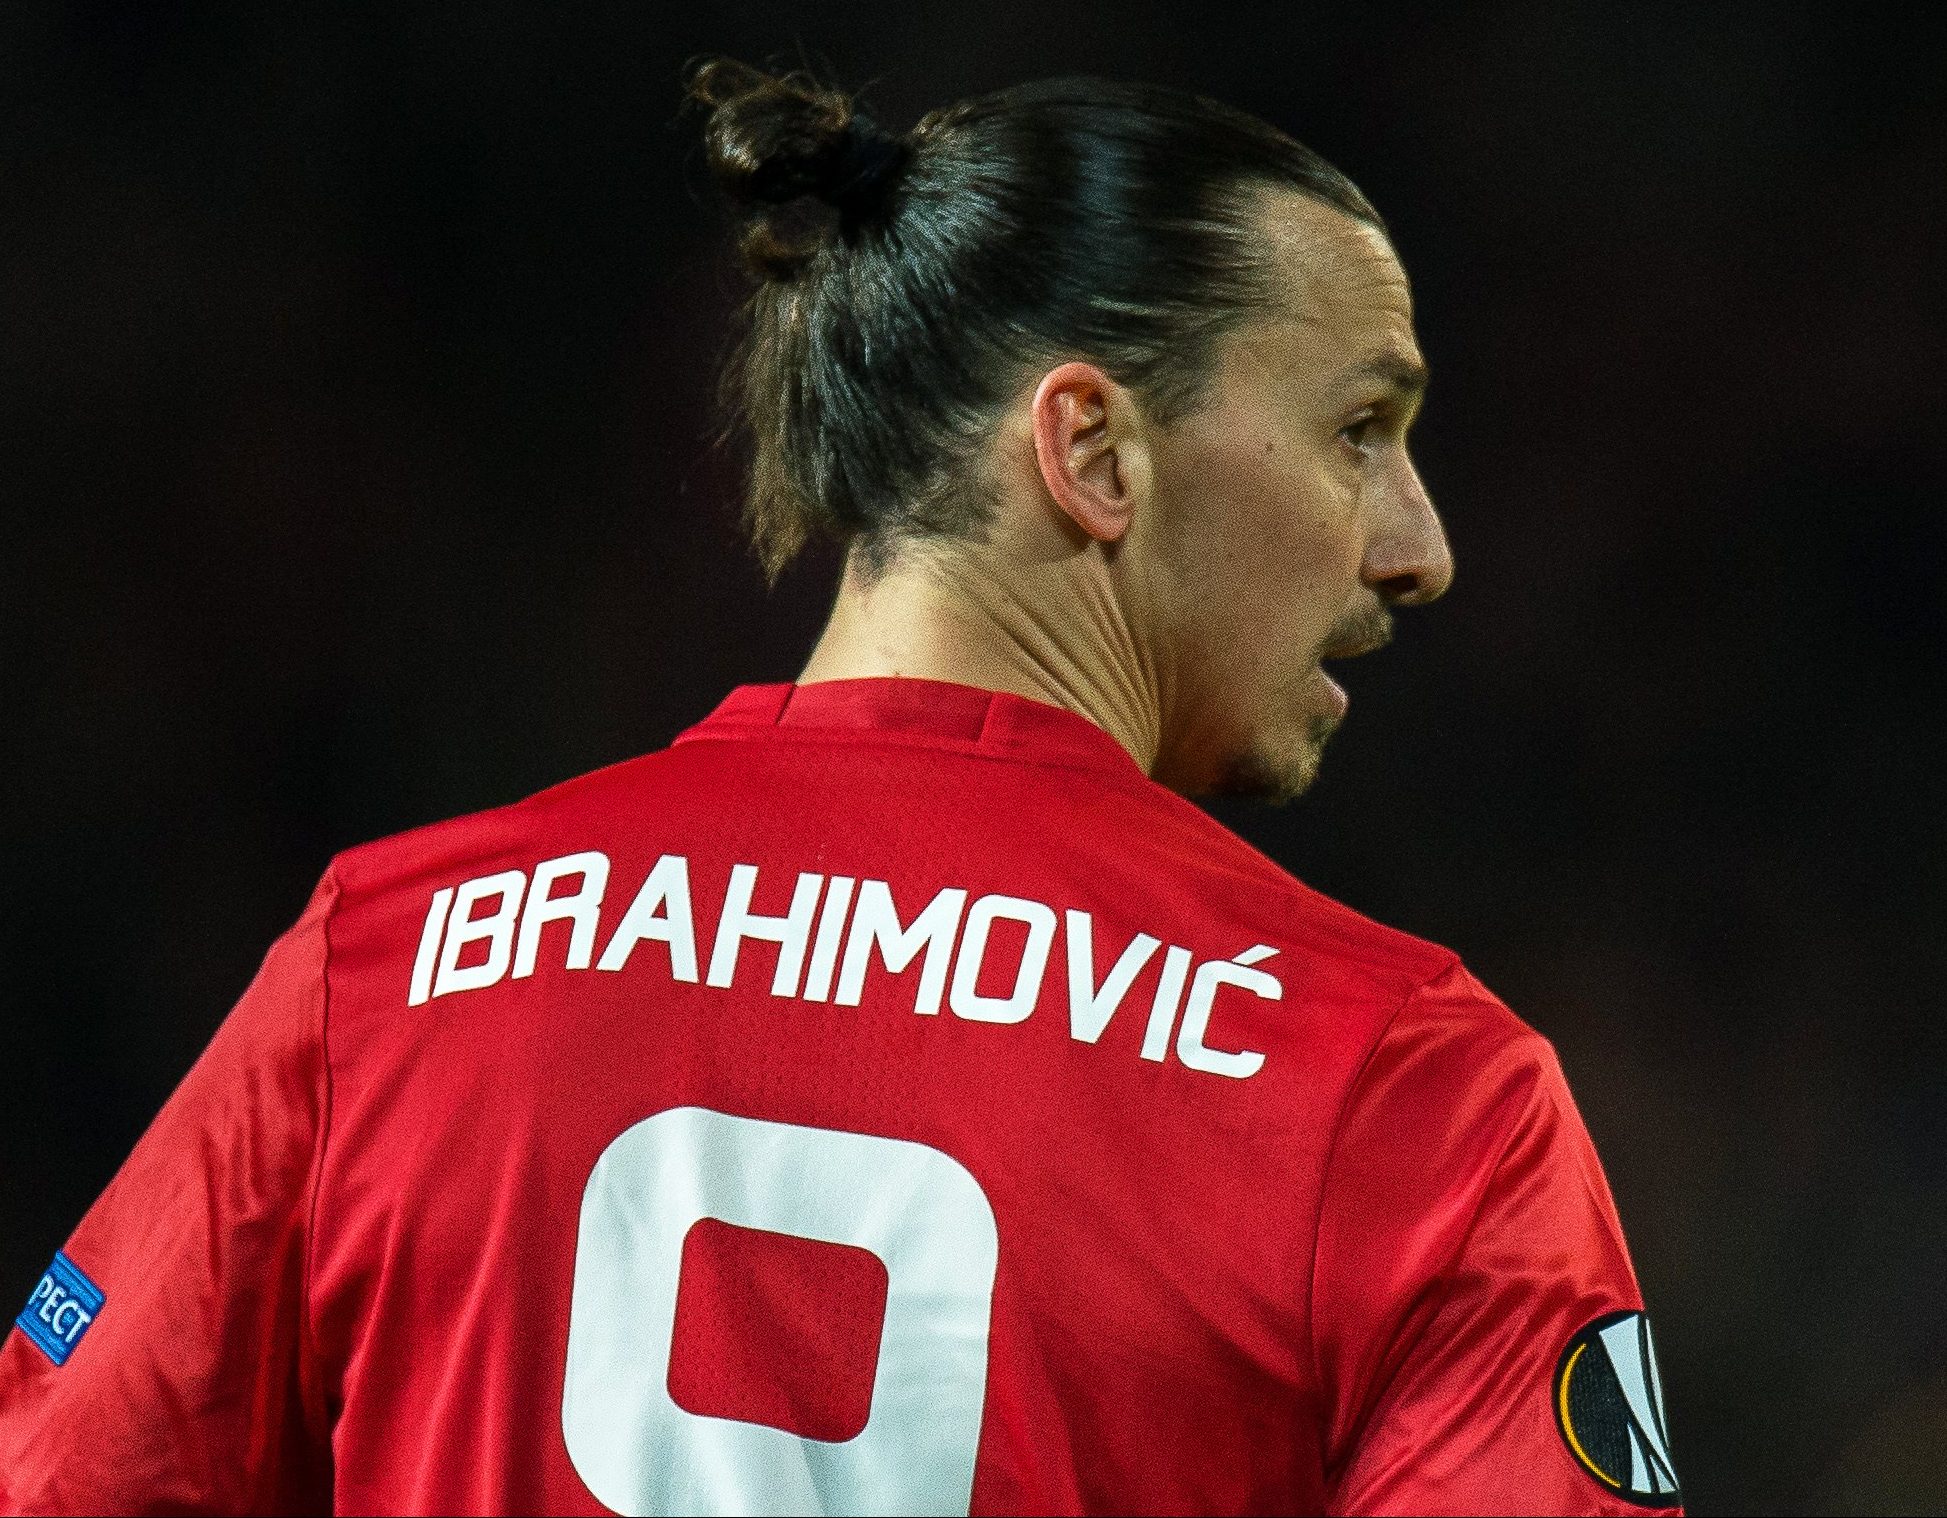 2017-03-16 19:38:05 epa05853179 Manchester United's Zlatan Ibrahimovic reacts during the UEFA Europa League round of 16, second leg soccer match between Manchester United and FK Rostov at Old Trafford in Manchester, Britain, 16 March 2017. EPA/PETER POWELL